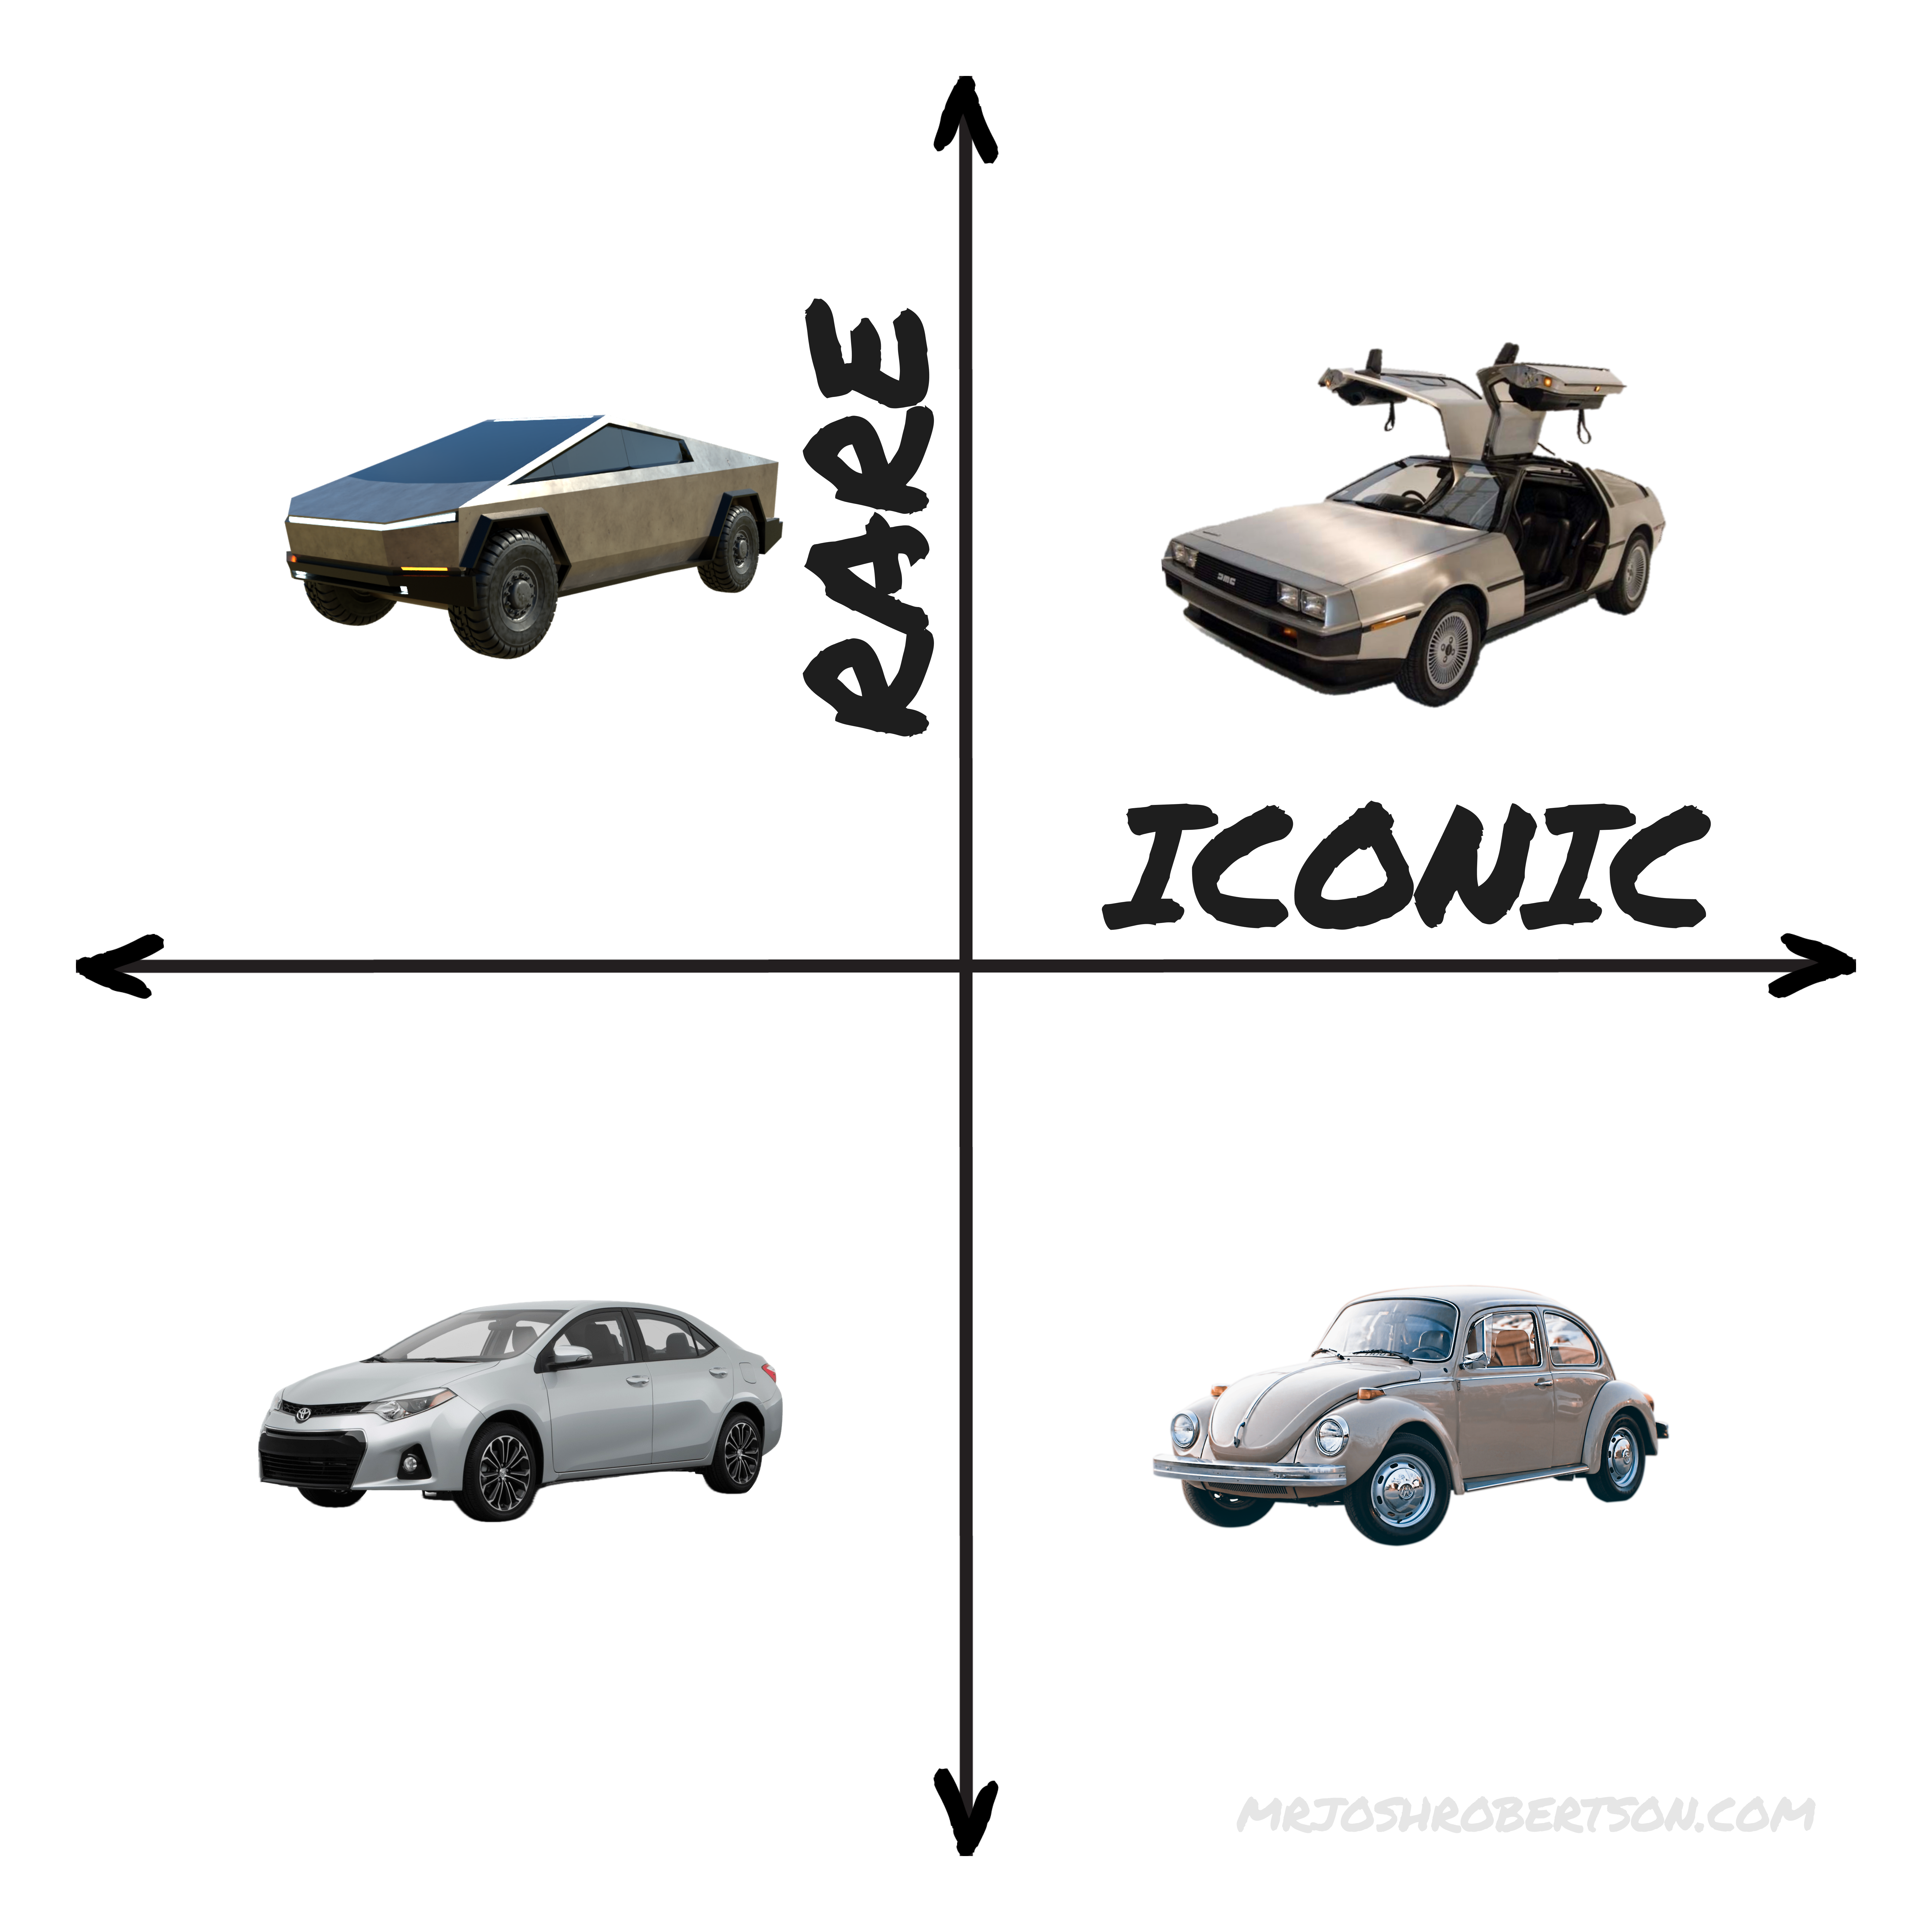 A 2x2 chart with "Rare" on the vertical axis and "Iconic" on the horizontal axis. The four quadrants contain the following vehicles:
Upper left (rare and not iconic): The Tesla Cybertruck electric pickup truck concept
Upper right (rare and iconic): The DeLorean DMC-12 sports car, famous from the Back to the Future films
Lower left (not rare and not iconic): A Toyota Corolla sedan, one of the best-selling car models worldwide
Lower right (not rare but iconic): The classic Volkswagen Beetle
The amusing chart categorizes how iconic and rare different vehicle models are, from the futuristic but polarizing Cybertruck to the beloved and ubiquitous VW Beetle. The vehicles represent the extremes on the spectrums of rarity and cultural iconic status.